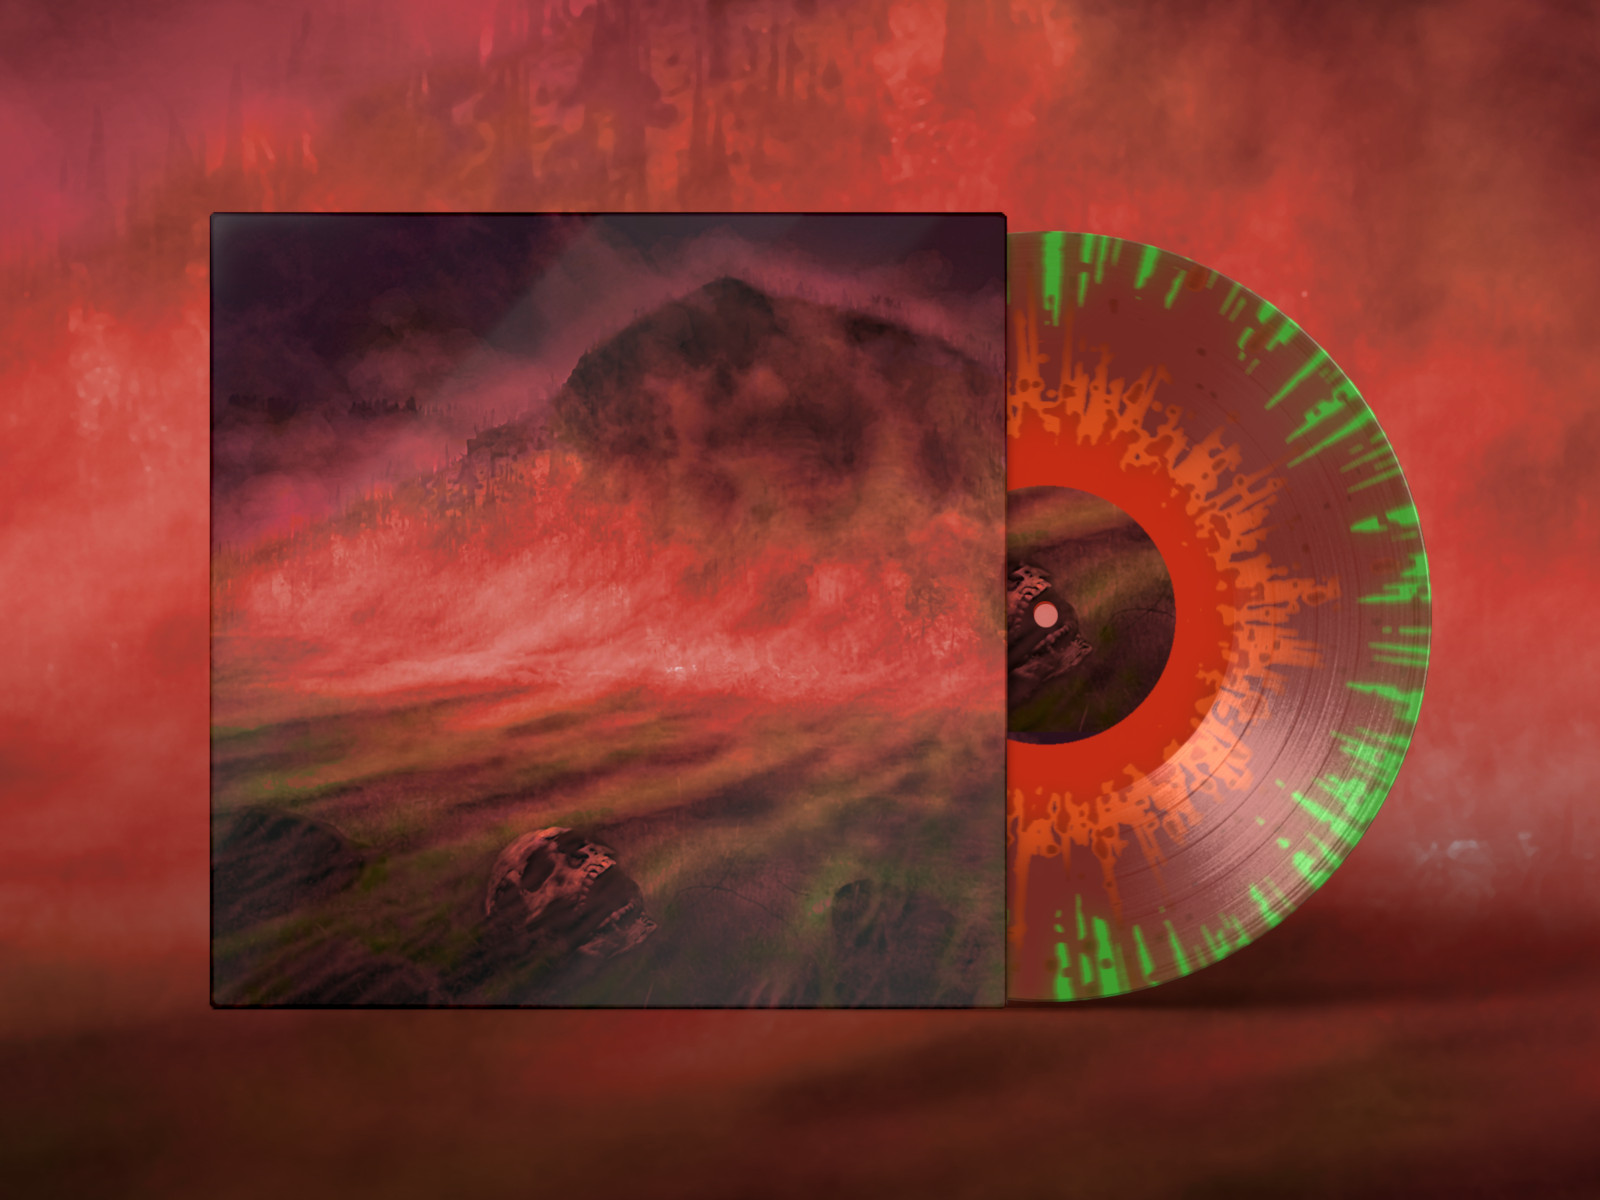 A photo-realistic mockup design comp of a colorful splatter vinyl record featuring artwork by Korpi.